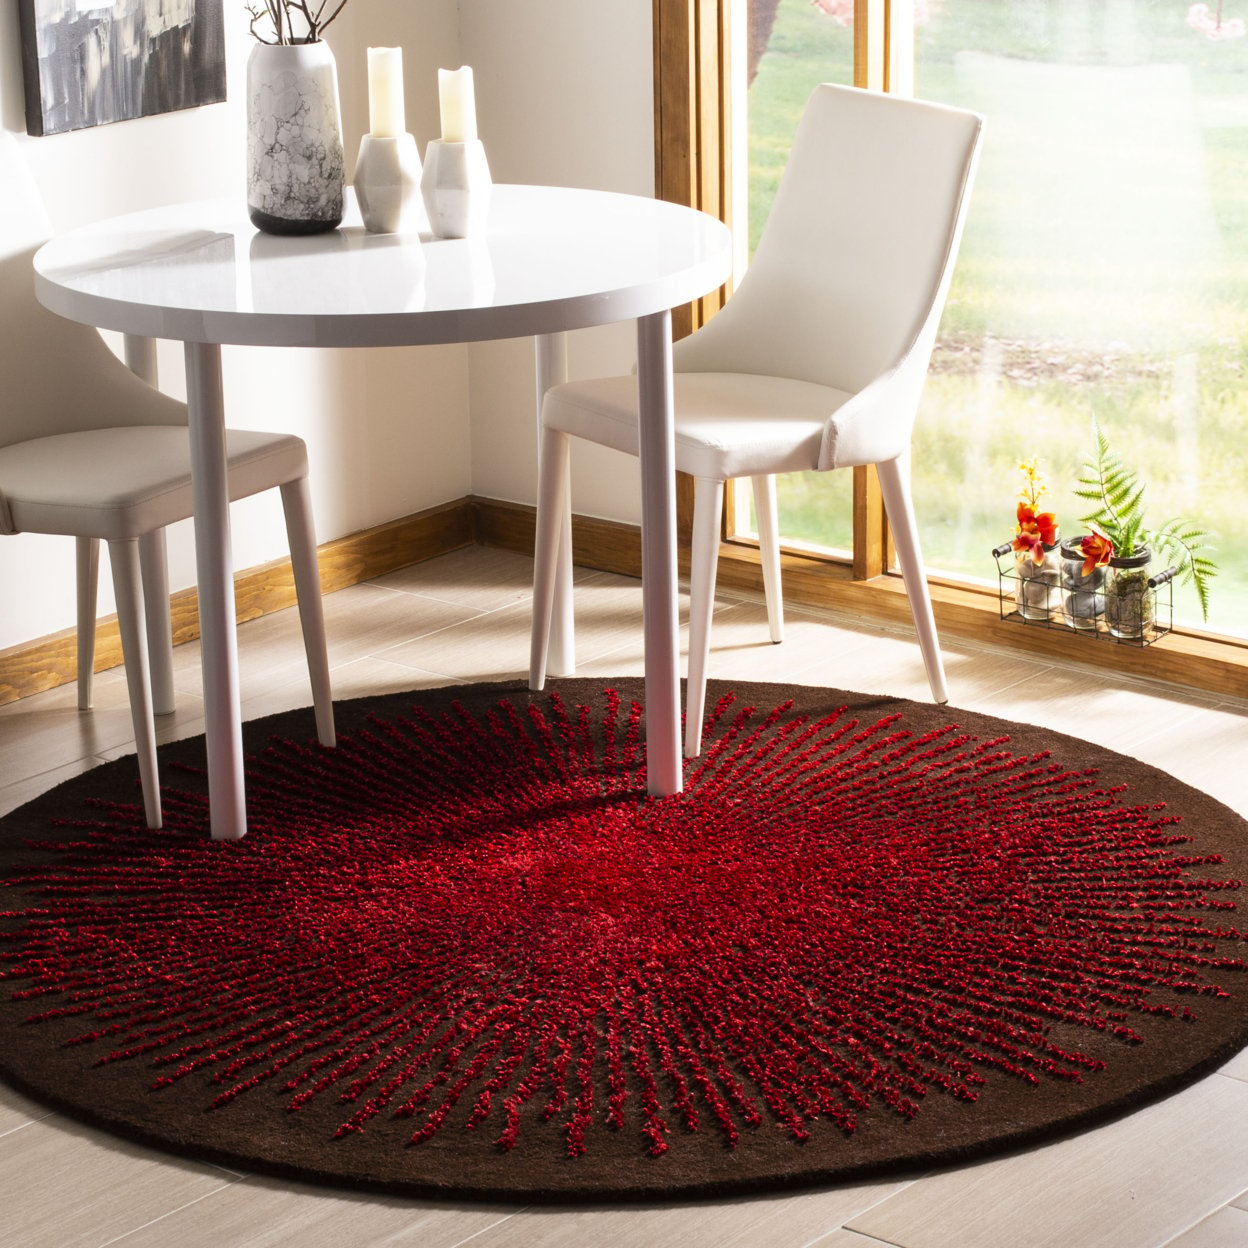 SAFAVIEH Soho Collection SOH655T Handmade Brown / Red Rug - 3' X 5'